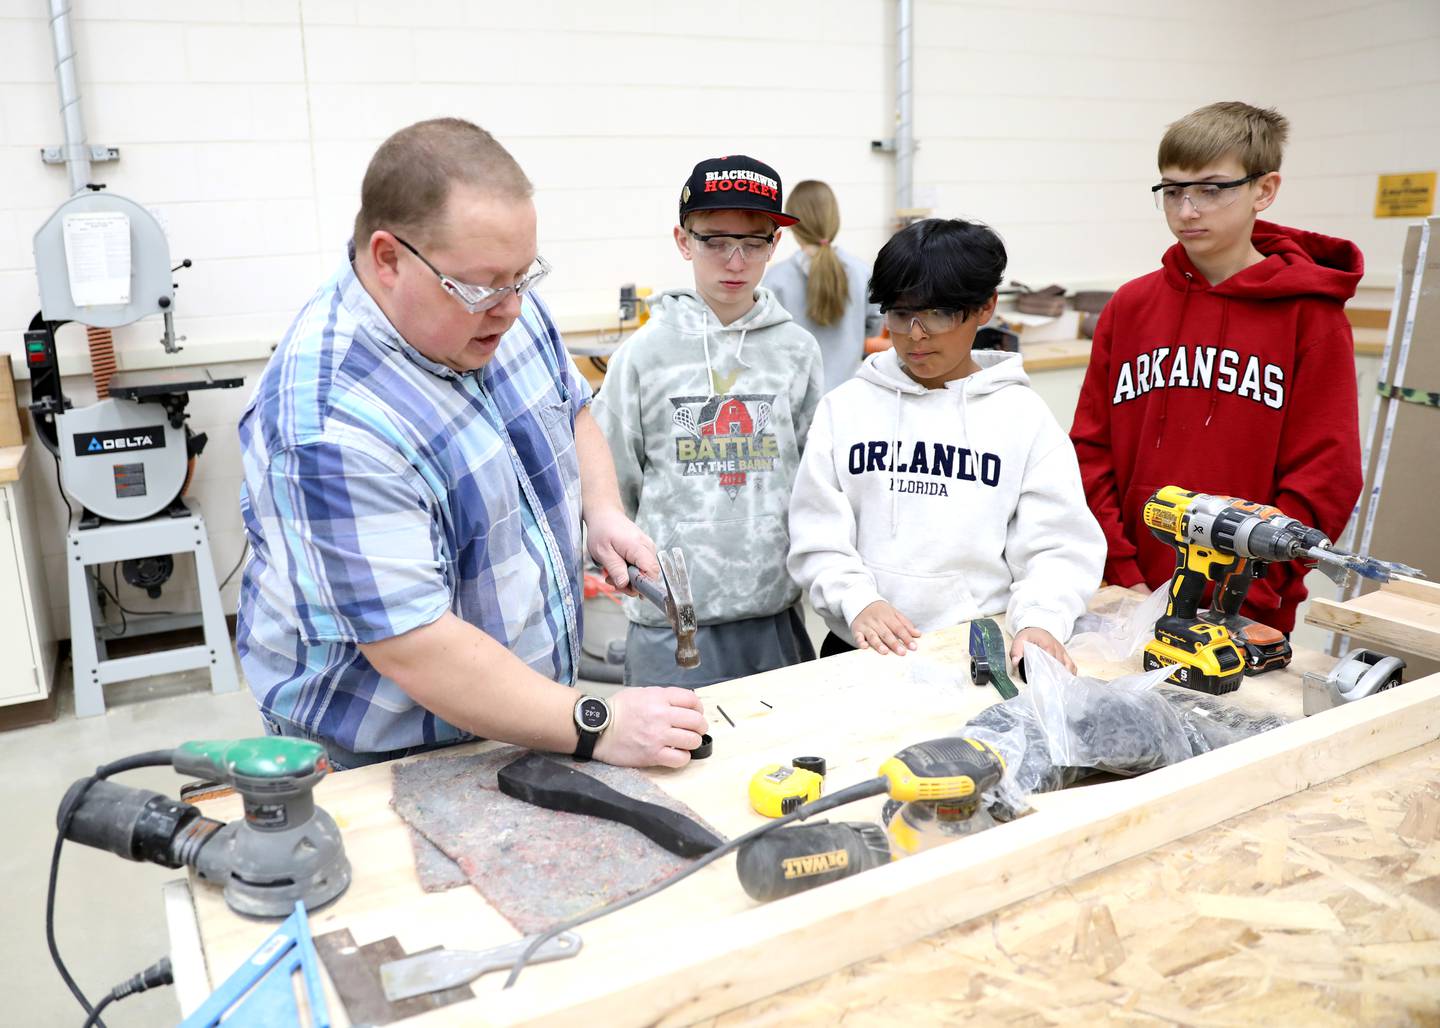 Kaneland Harter Middle School industrial arts teacher Michael Livorsi was recently nominated for an Educator of the Year award from the Kane County Regional Office of Education.